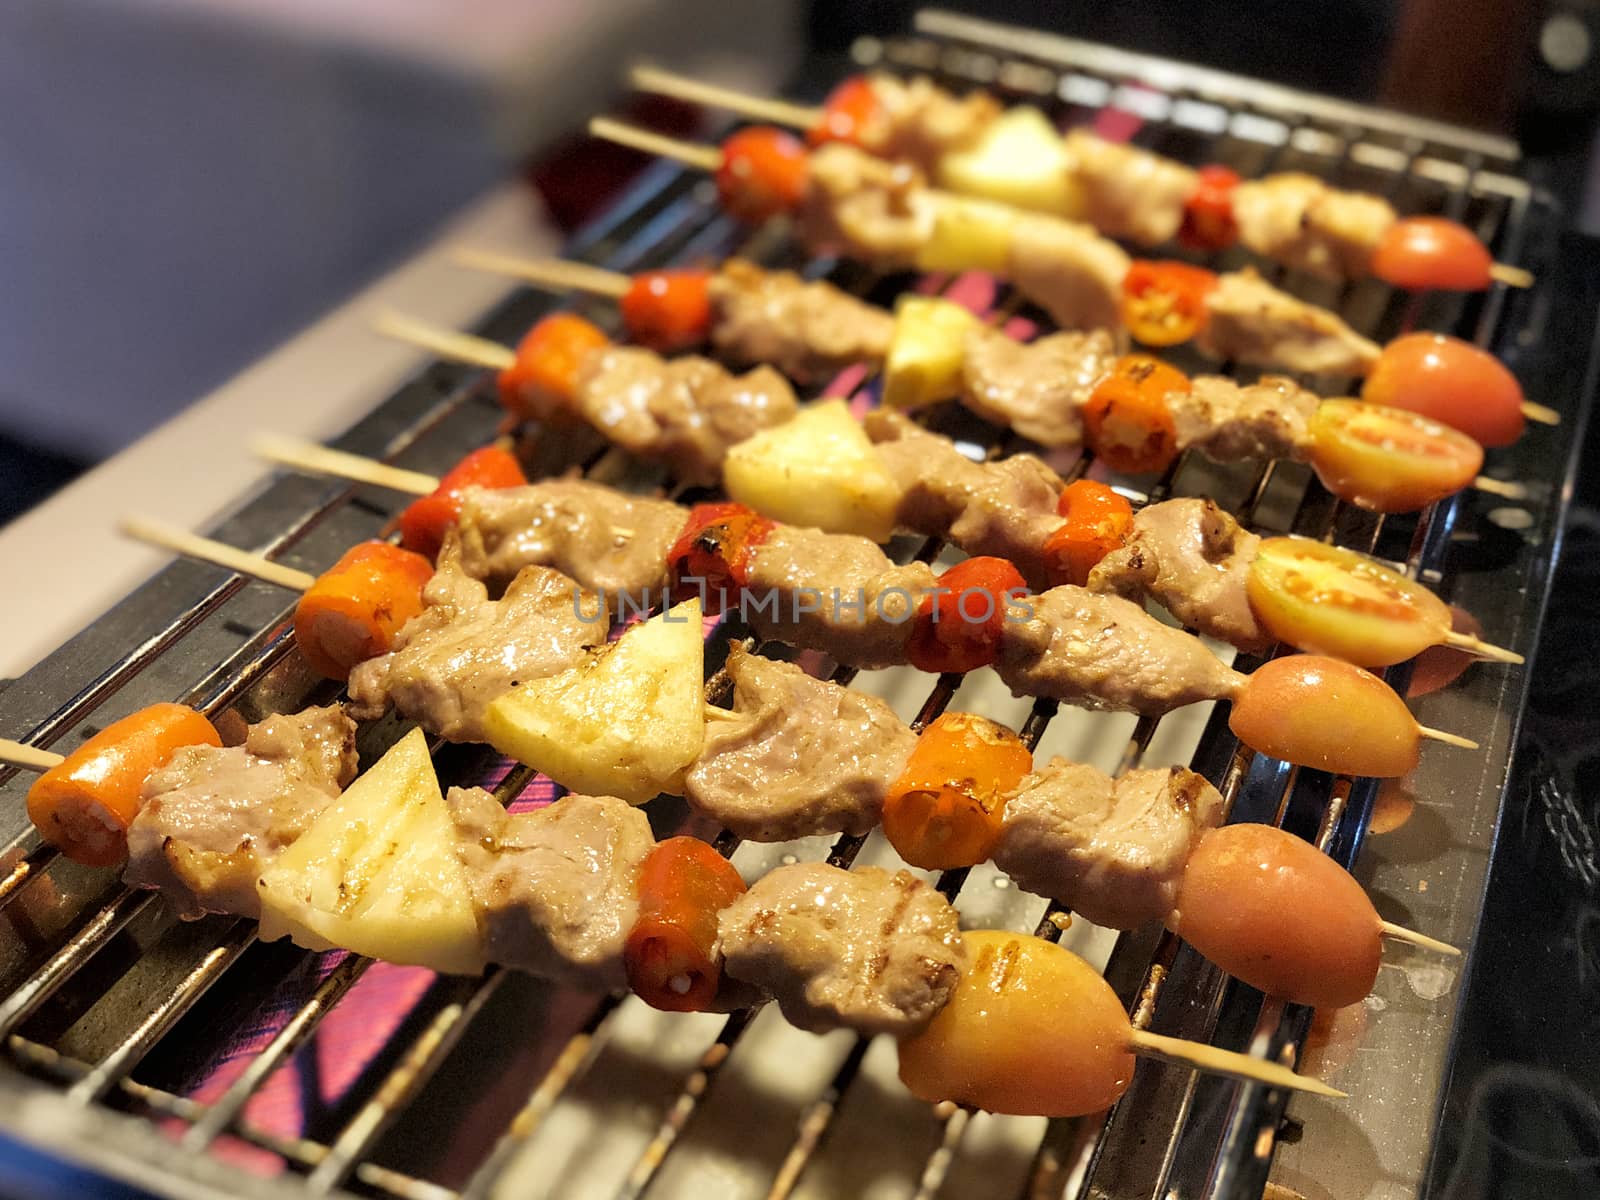 Chicken and pork and various vegetables on barbecue grill cooked 